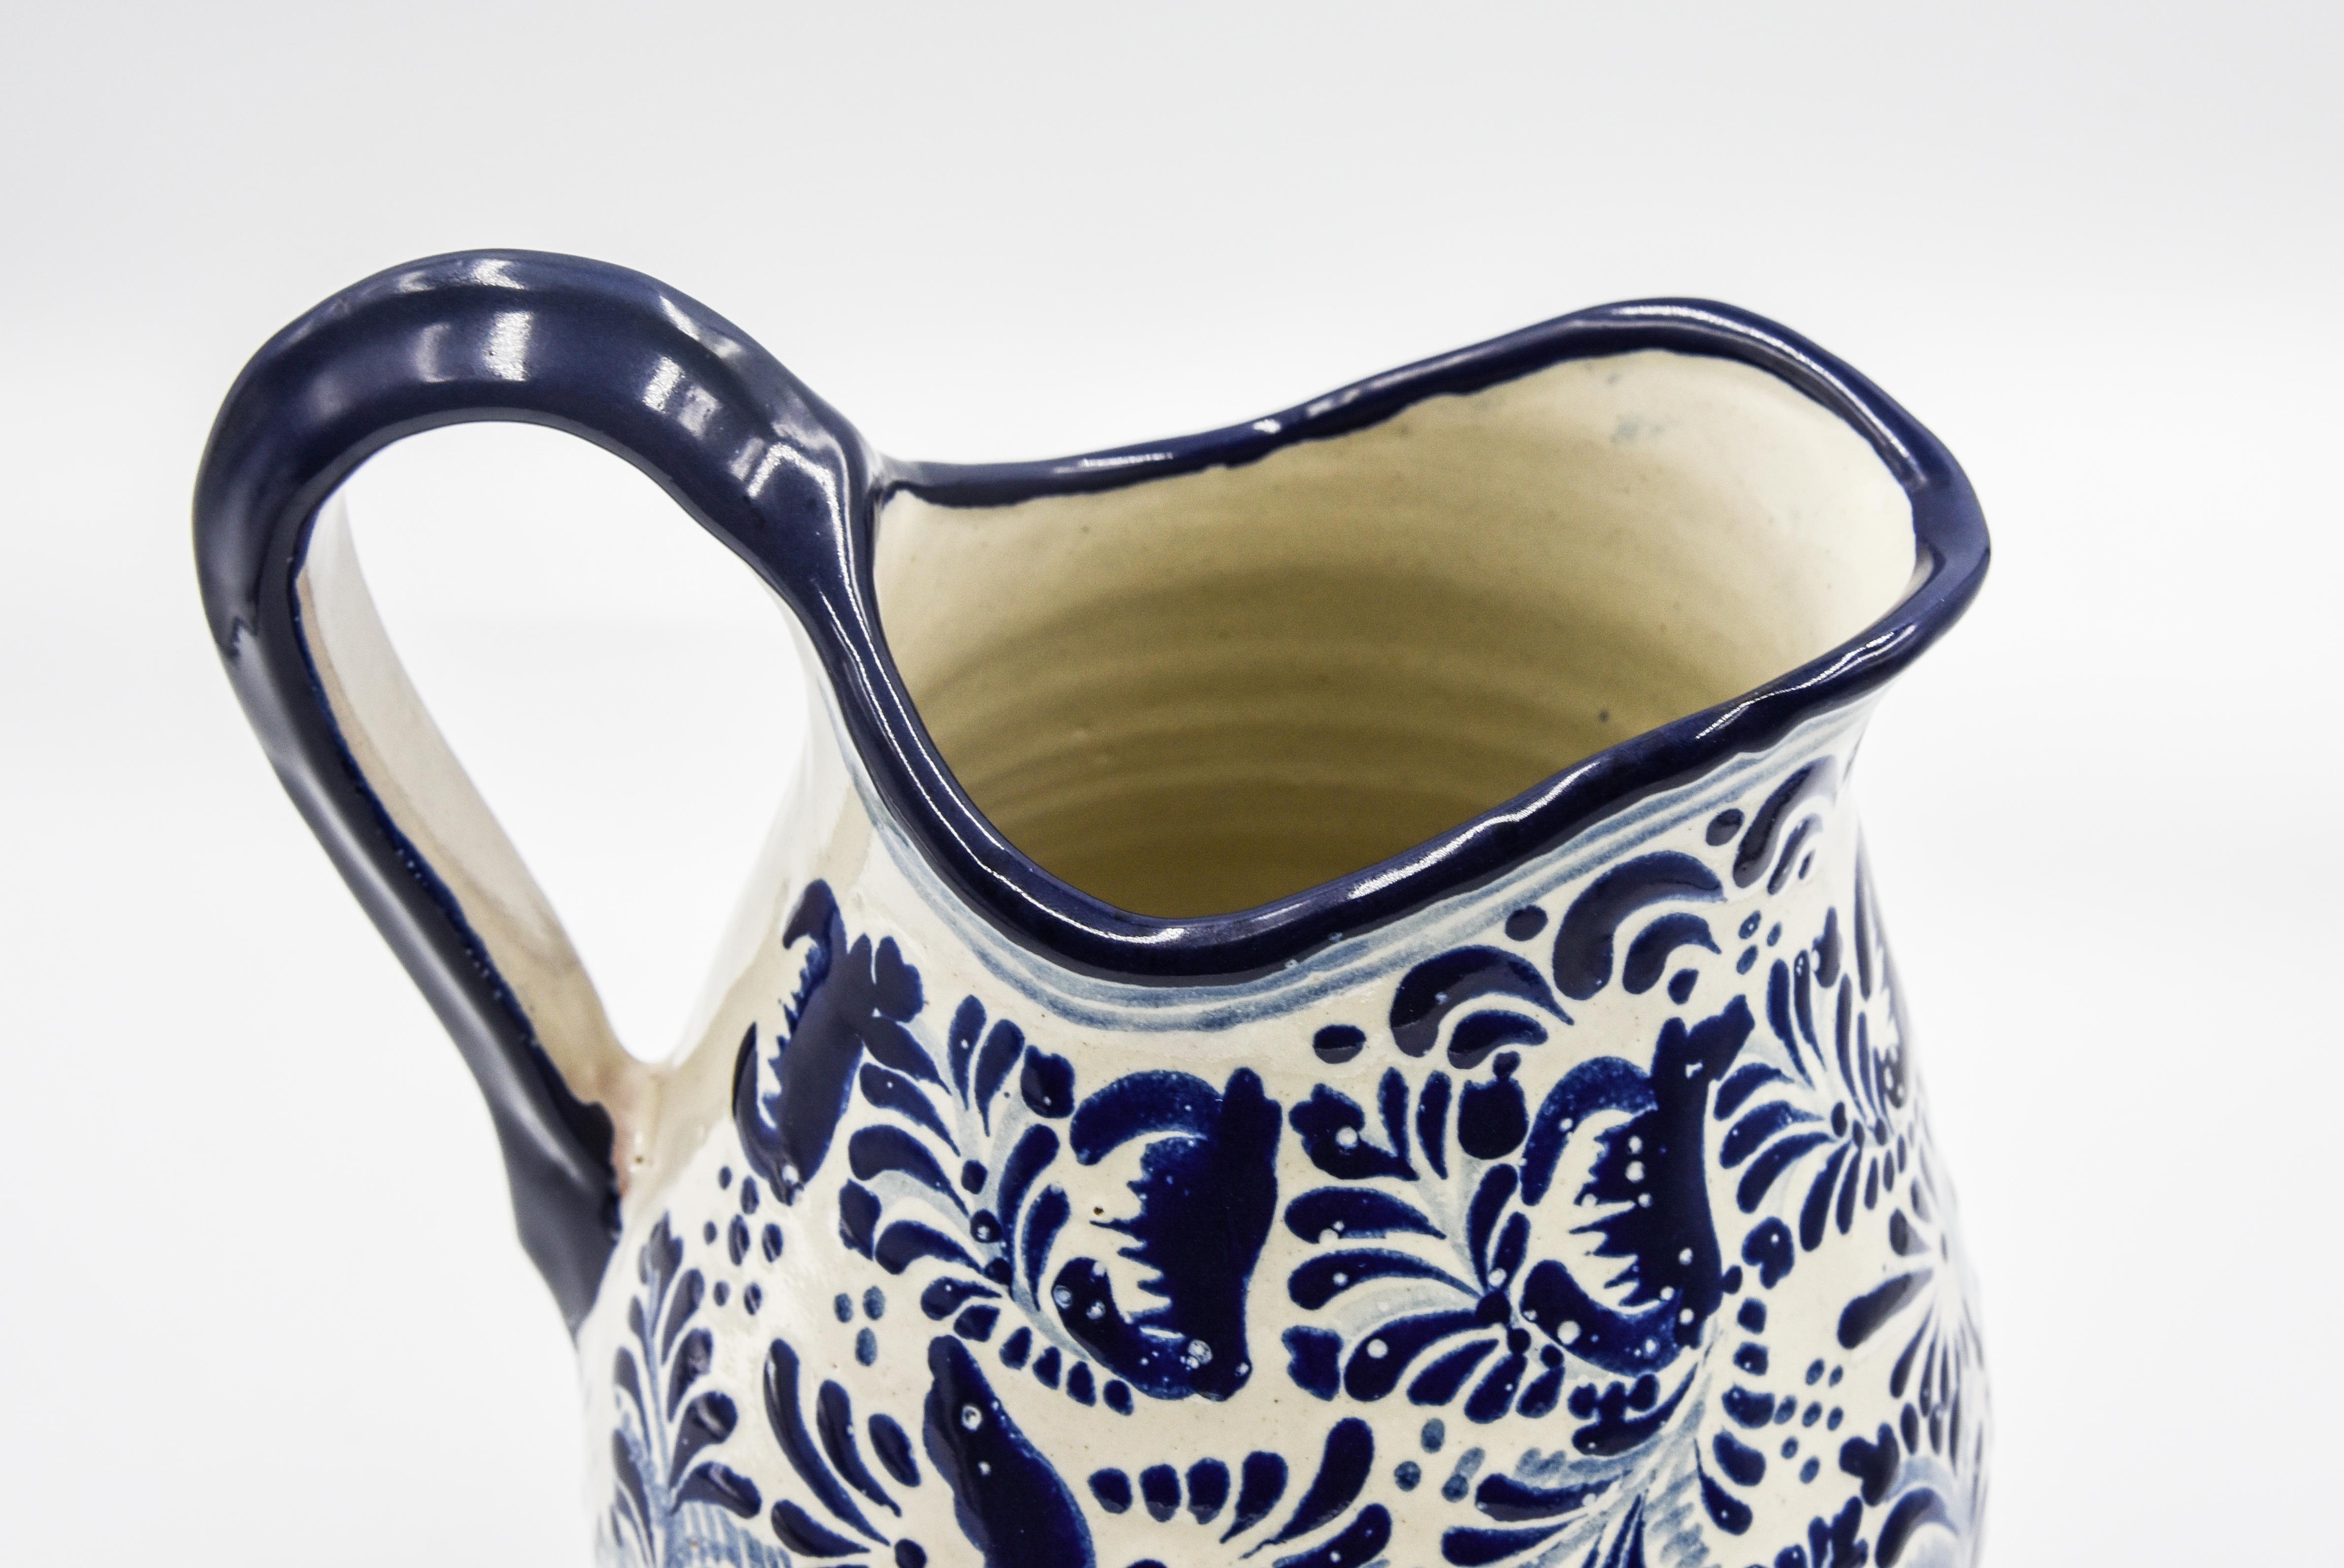 Hand-Crafted Authentic Talavera Blue Pitcher Puebla Ceramic Traditional Mexican Decorative